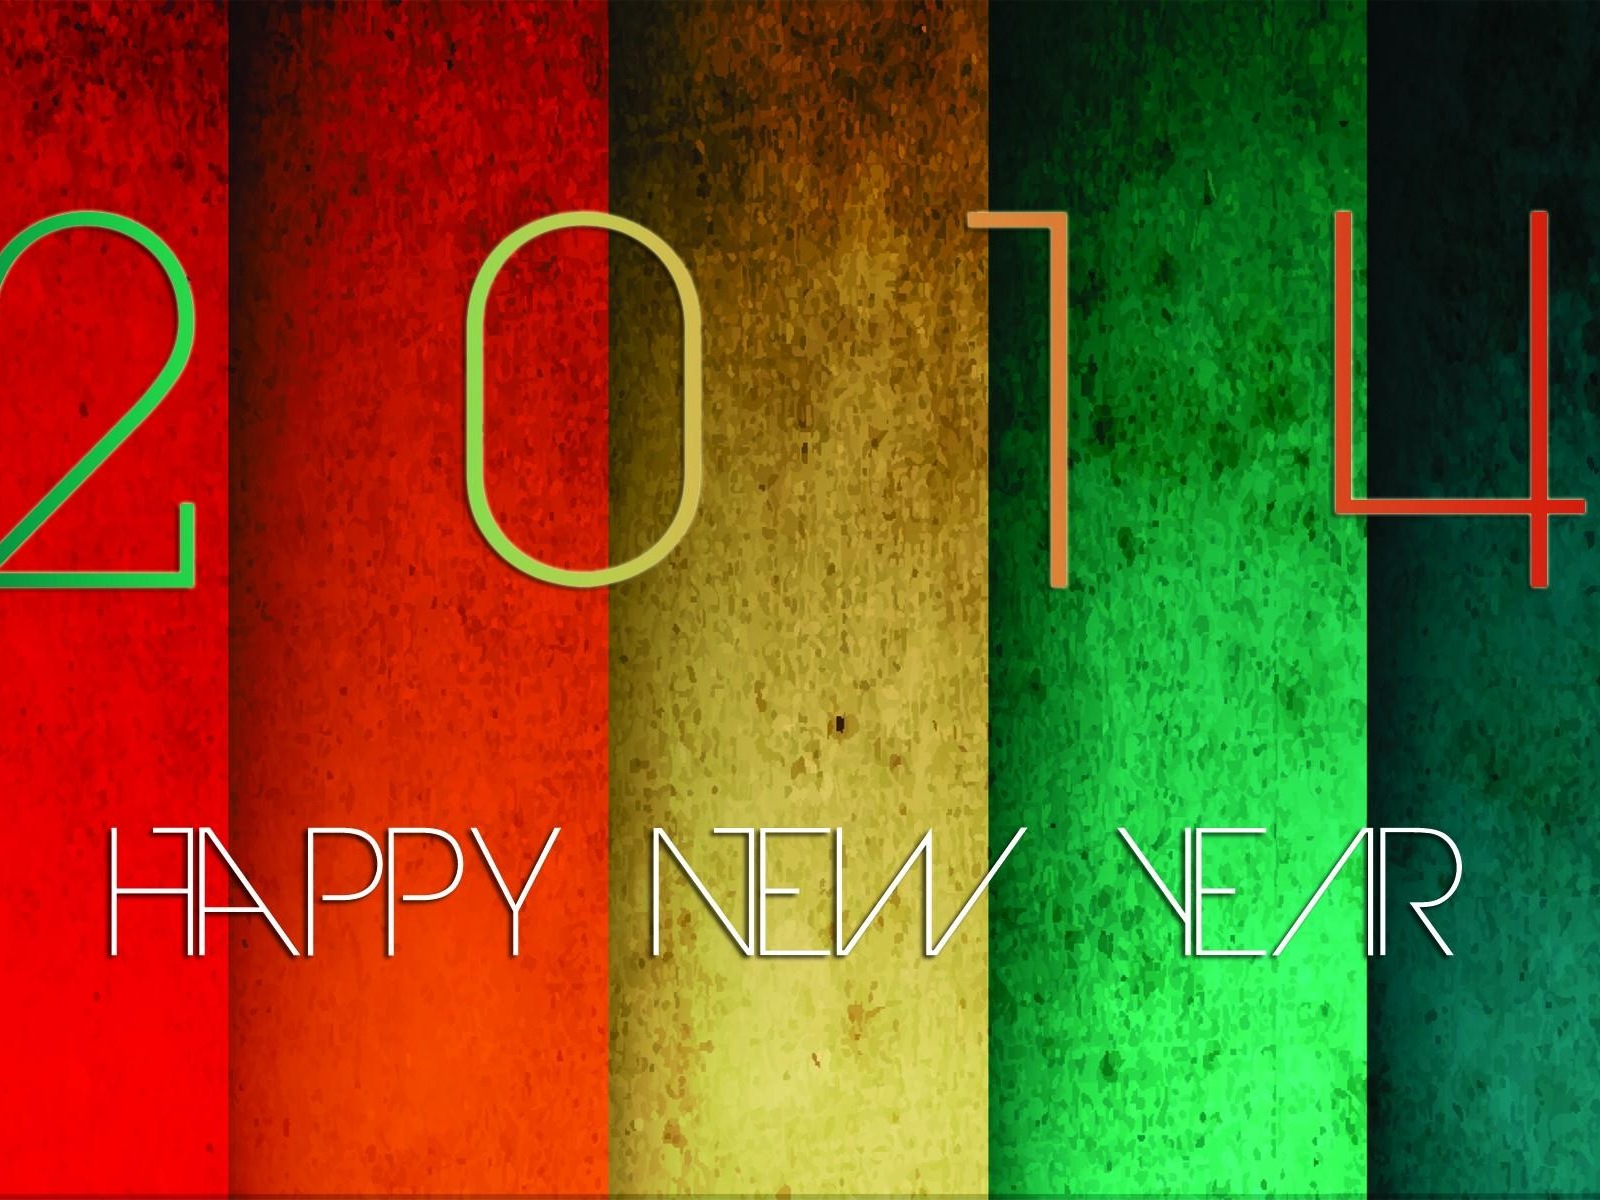 2014 New Year Theme HD Wallpapers (2) #3 - 1600x1200